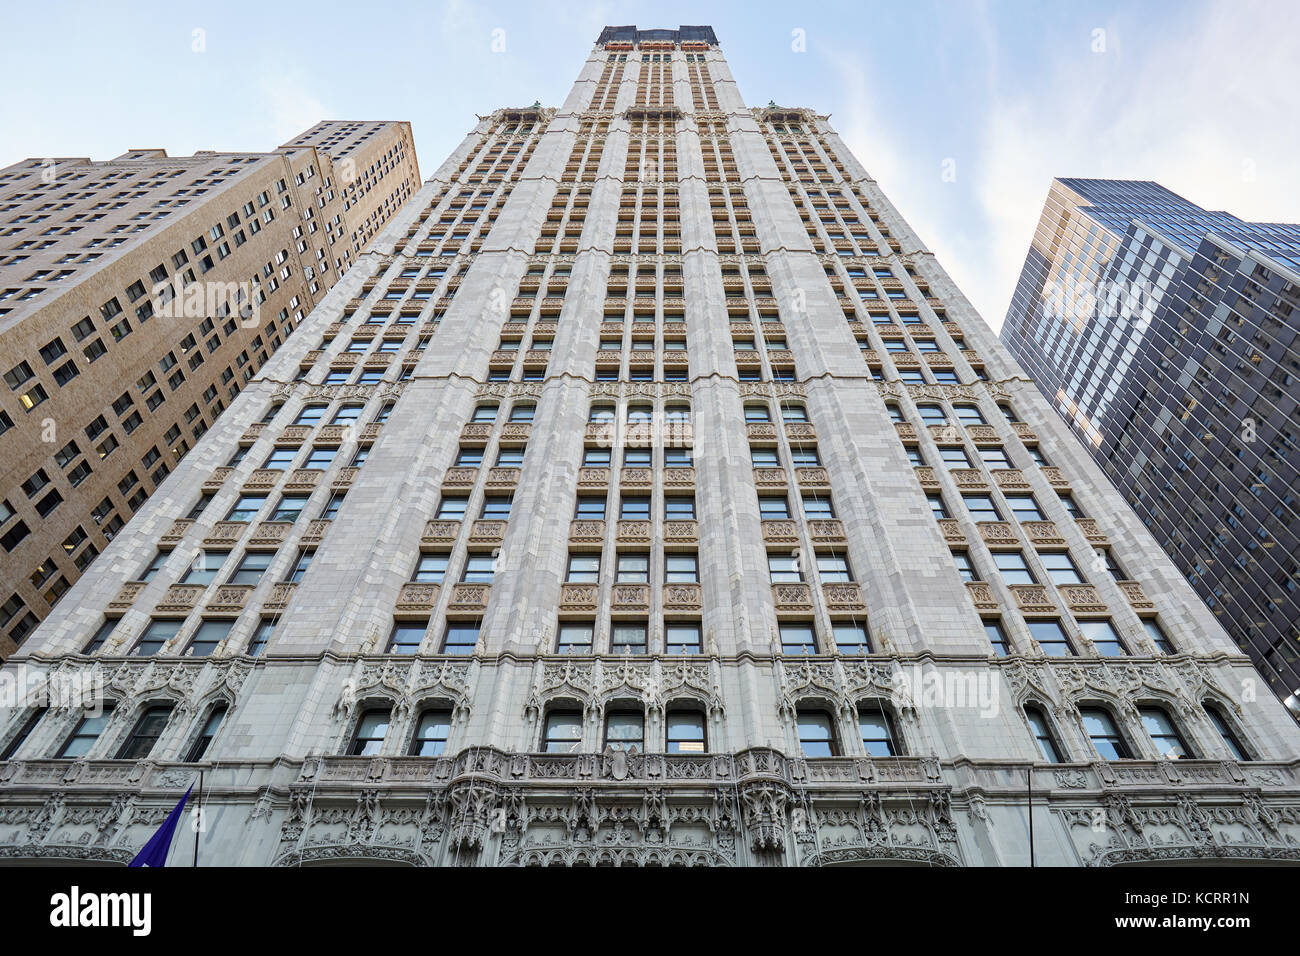 Woolworth Building skyscraper Low Angle View in New York Stockfoto